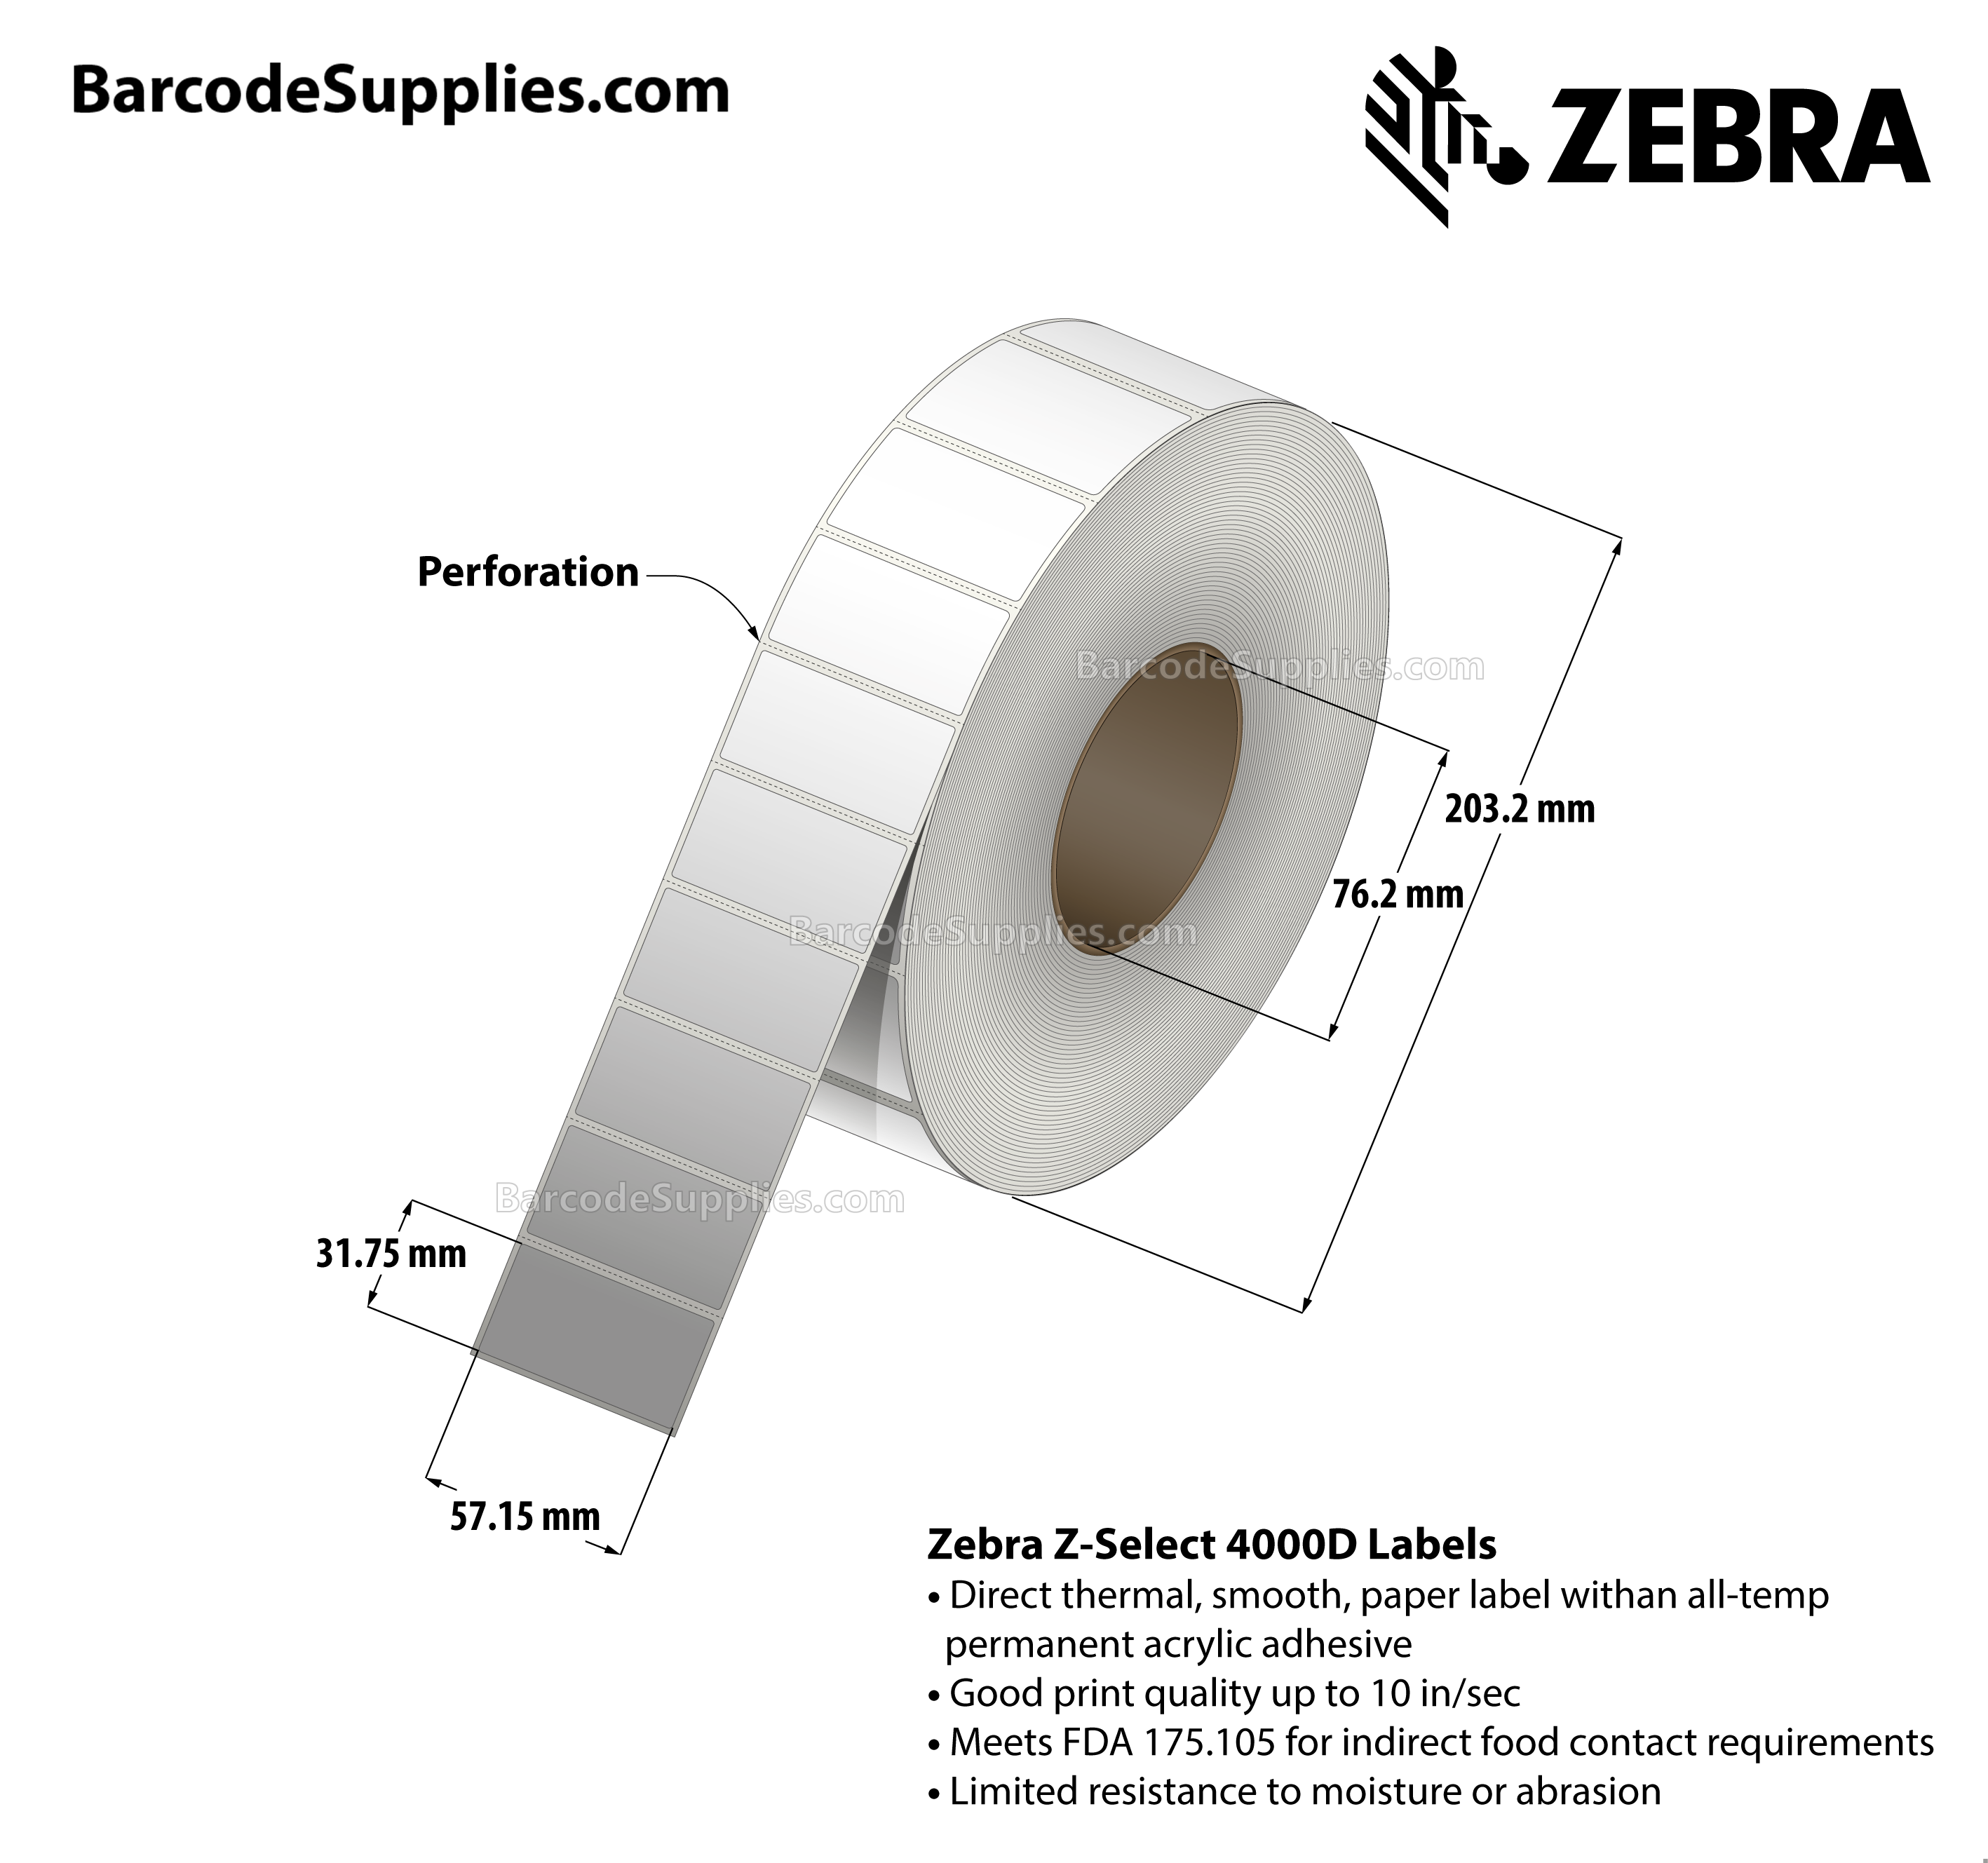 2.25 x 1.25 Direct Thermal White Z-Select 4000D Labels With All-Temp Adhesive - Perforated - 3770 Labels Per Roll - Carton Of 8 Rolls - 30160 Labels Total - MPN: 10002635